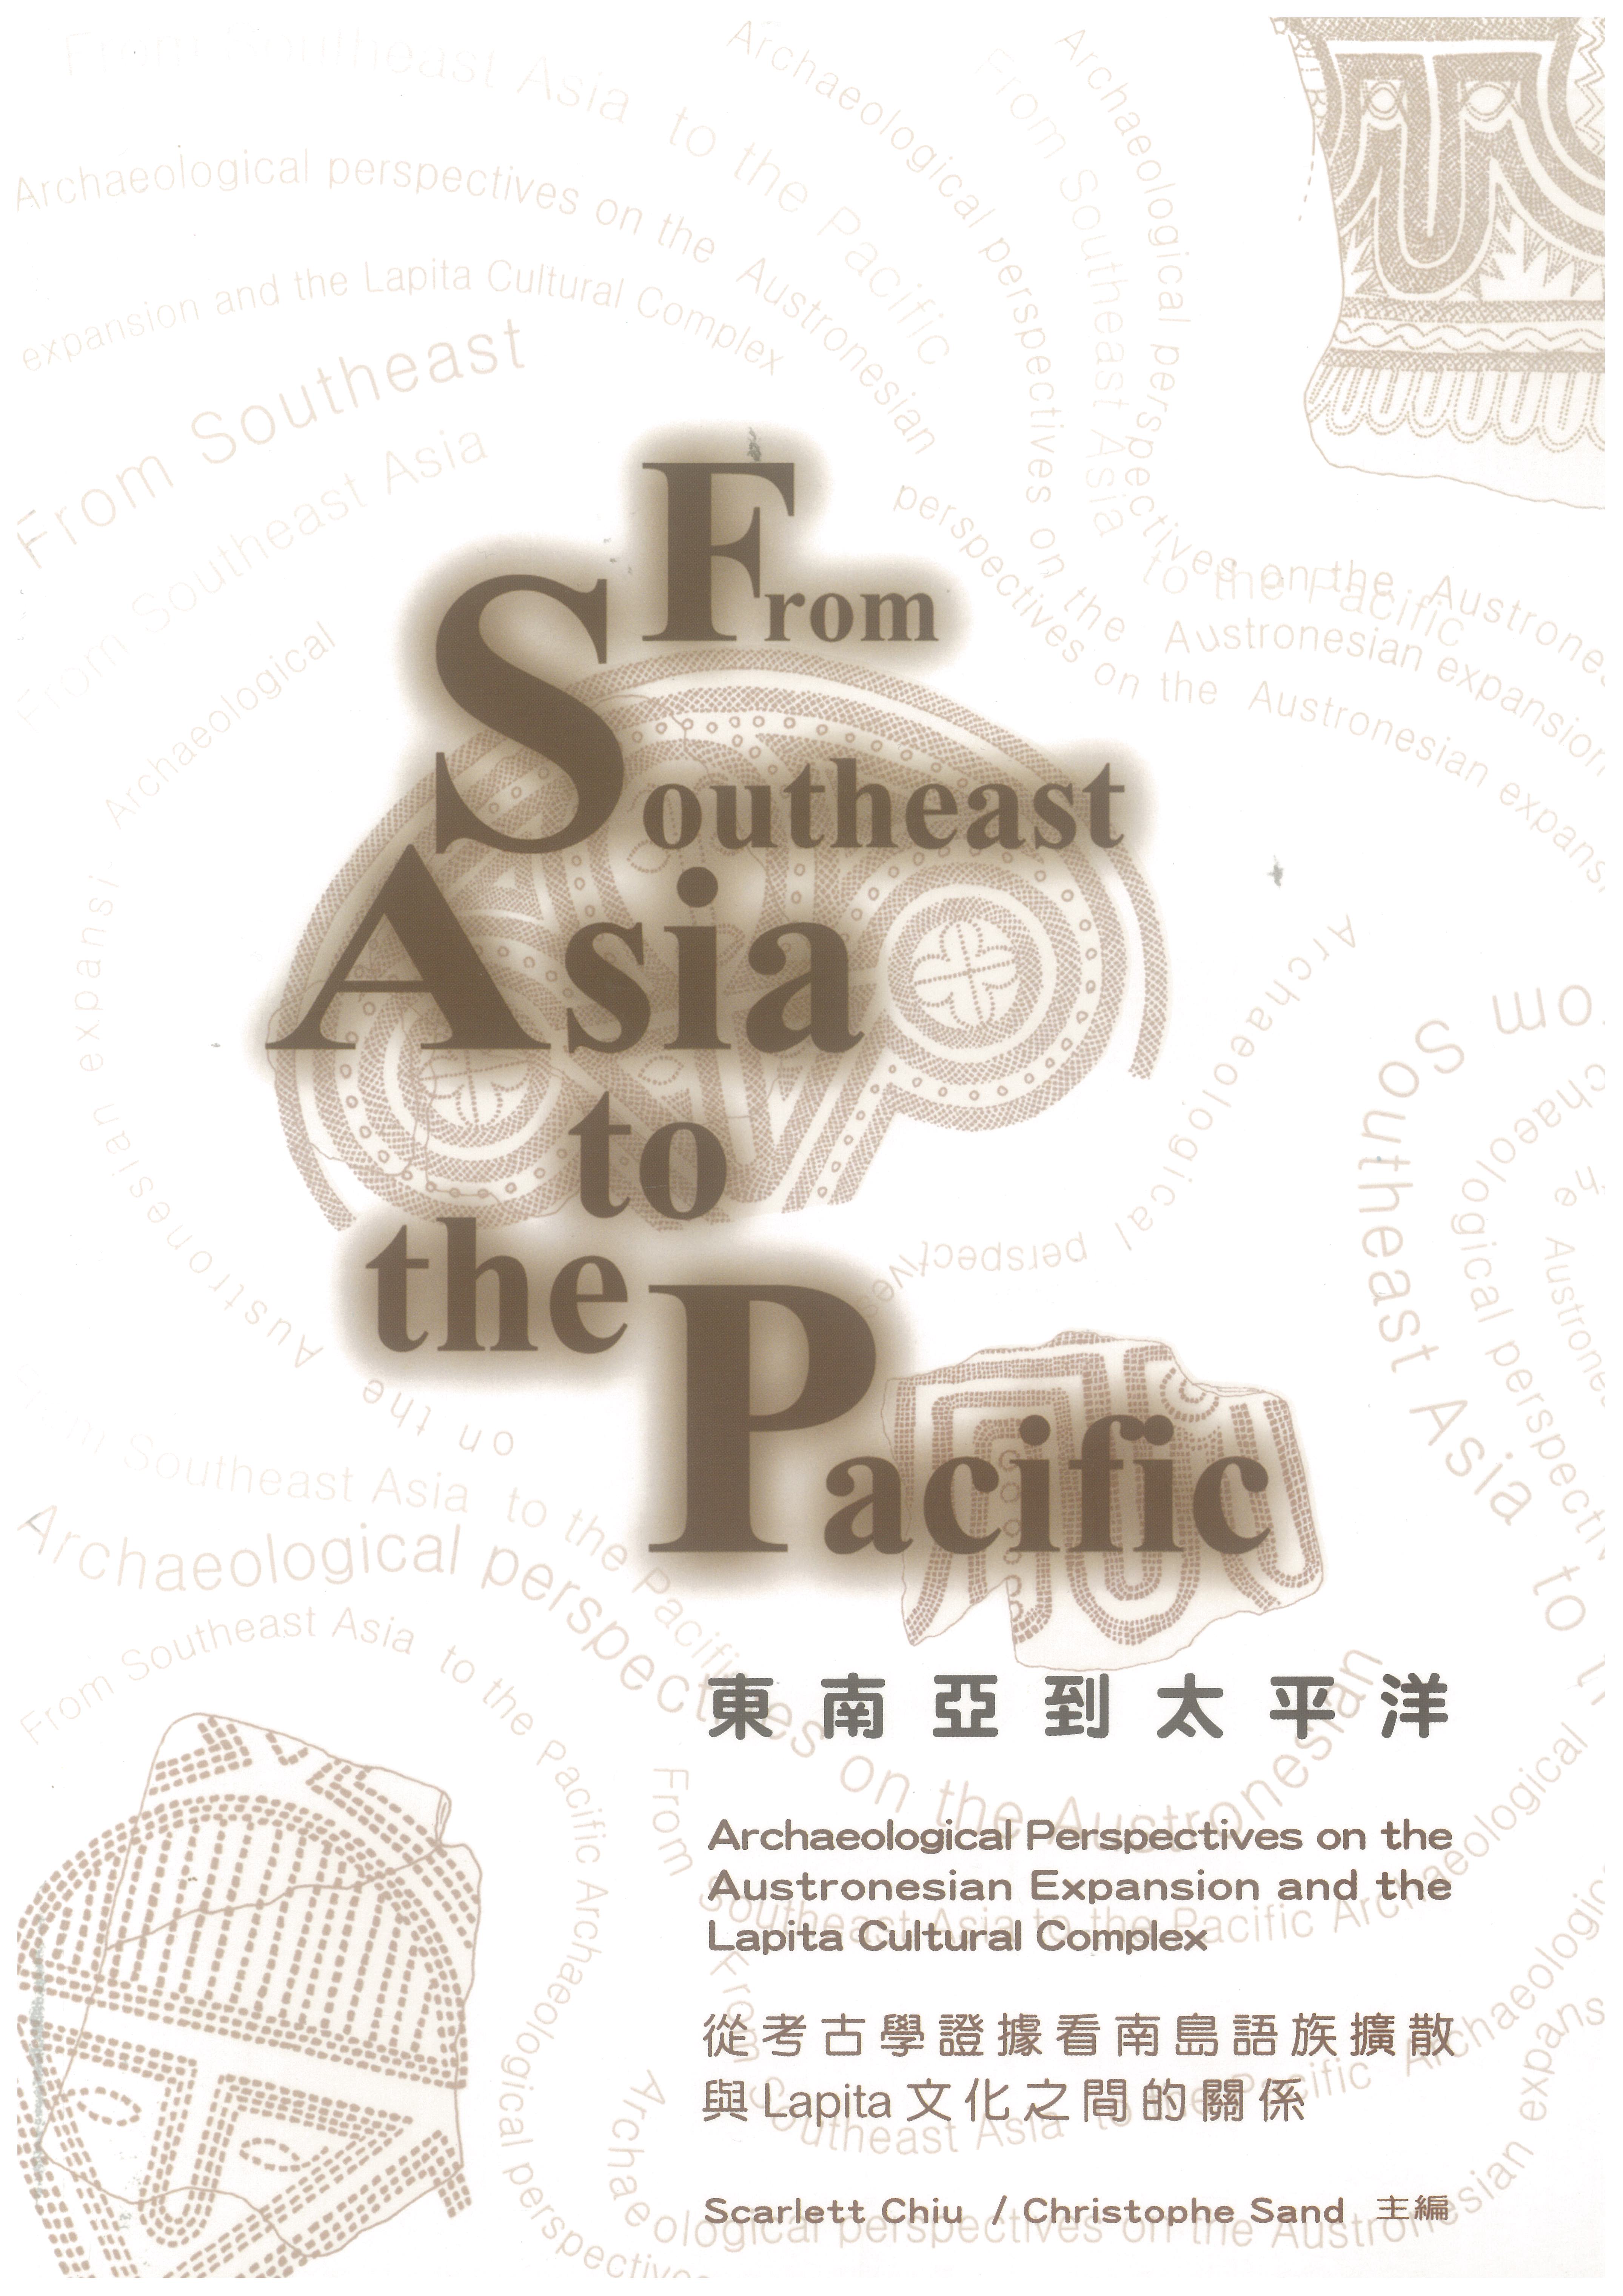 From Southeast Asia to the Pacific: Archaeological Perspectives on the Austronesian Expansion and the Lapita Cultural Complex